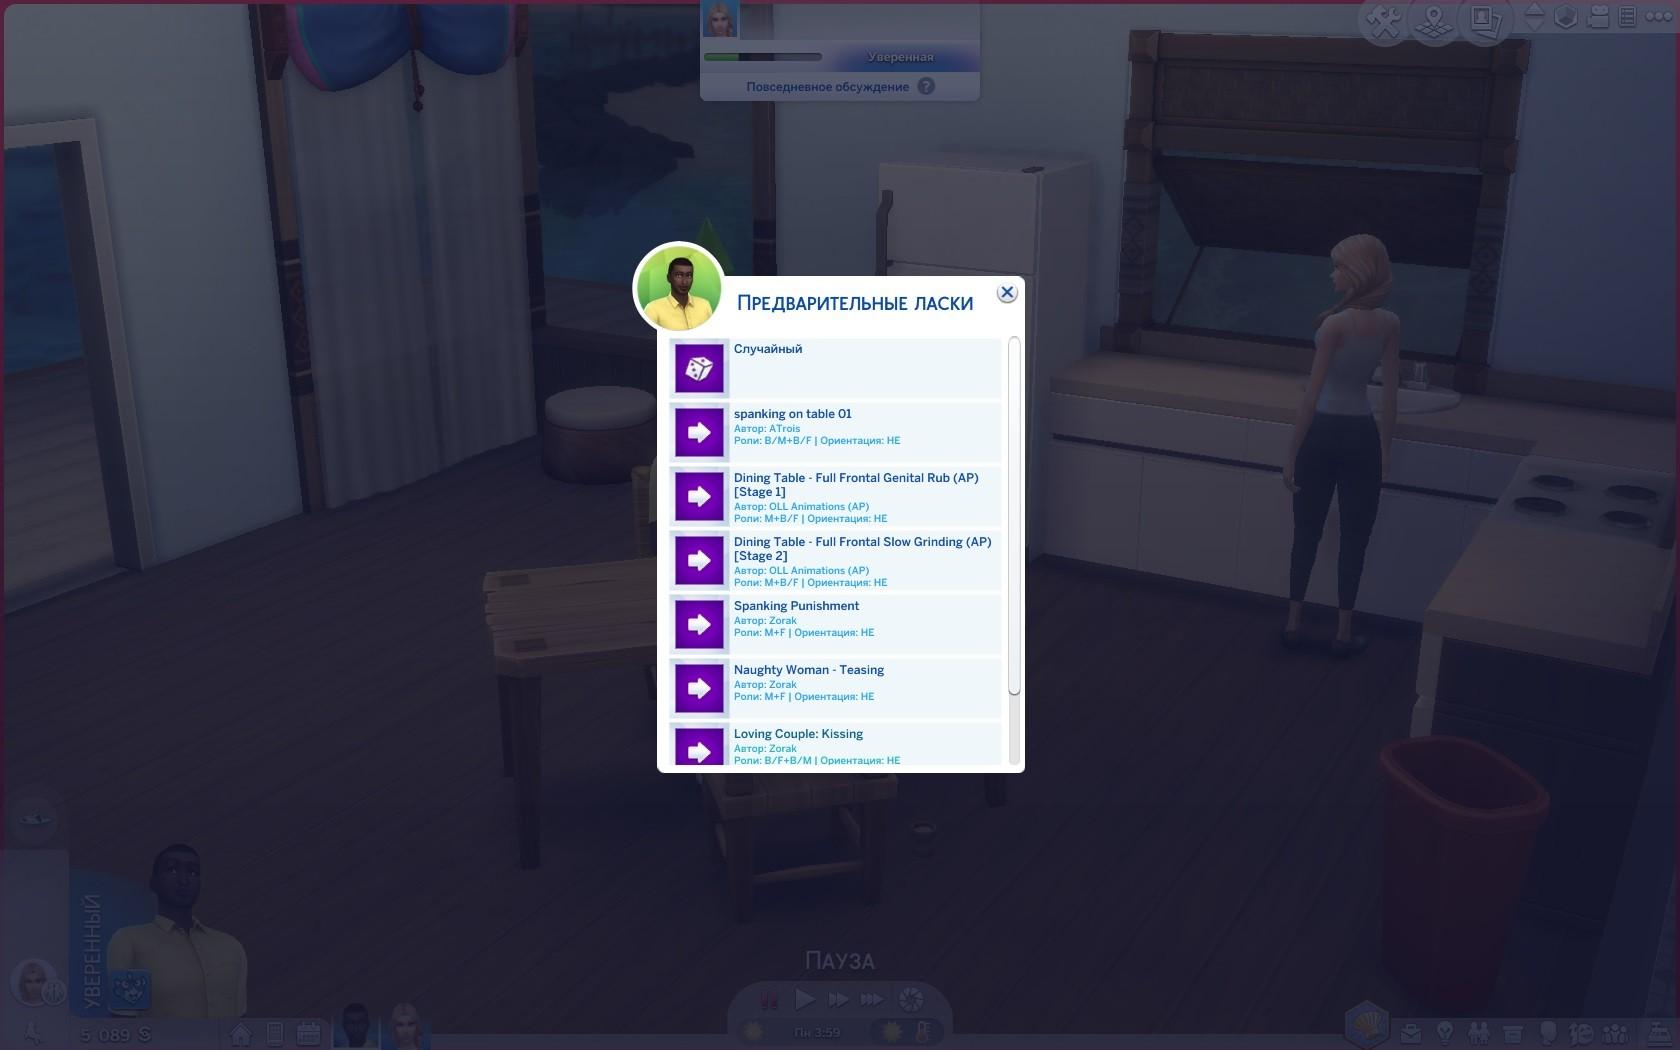 Whickedwhims симс русификатор. SIMS 4 wickedwhims. Wicked whims SIMS 4 симс 4. Мод на симс Wicked whims. SIMS 4 мод wickedwhims.